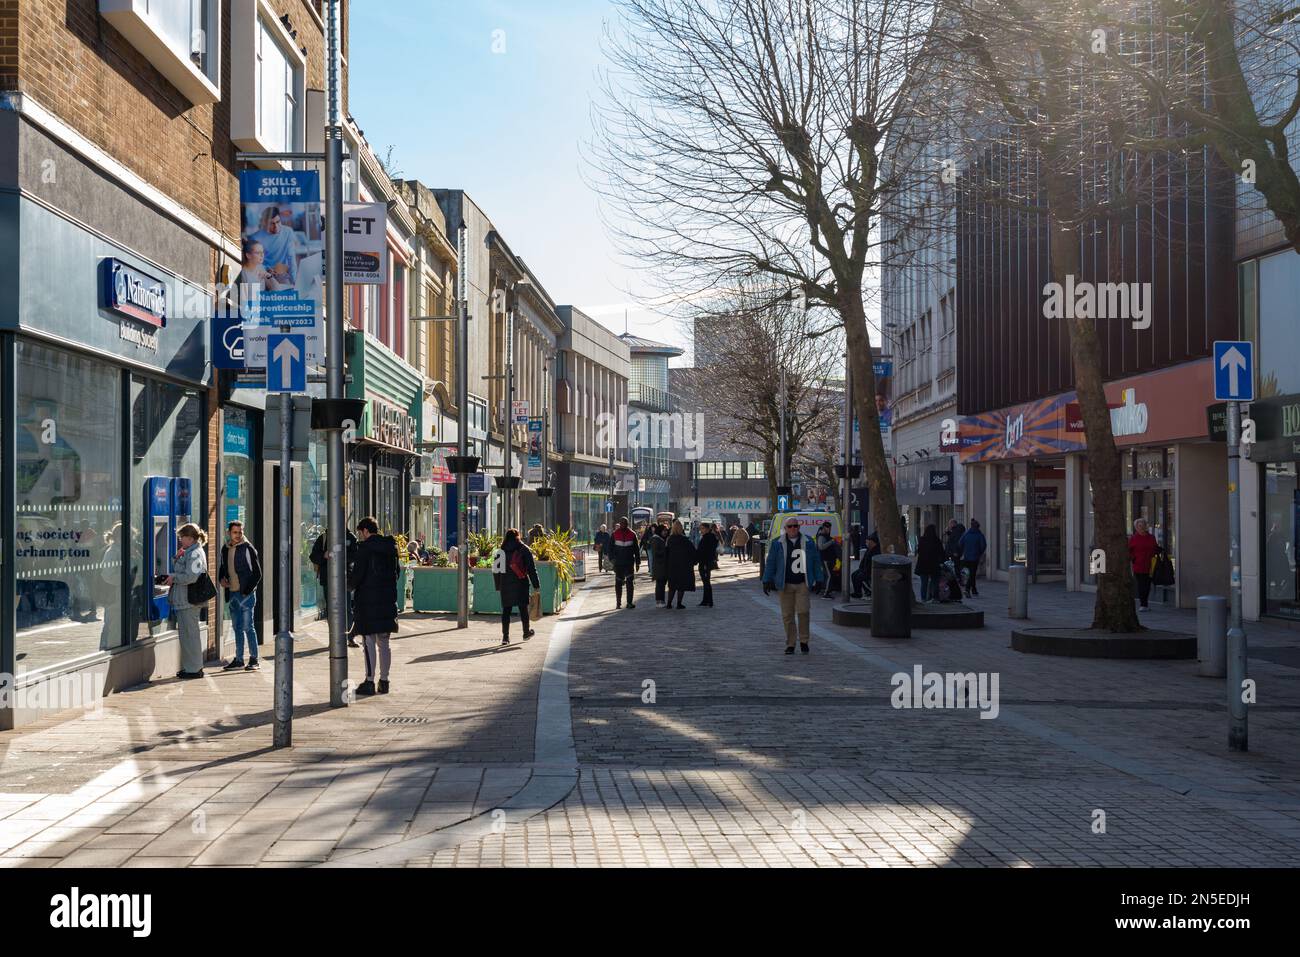 Shops and shoppers in Dudley Street, the main shopping hit street in Wolverhampton Stock Photo